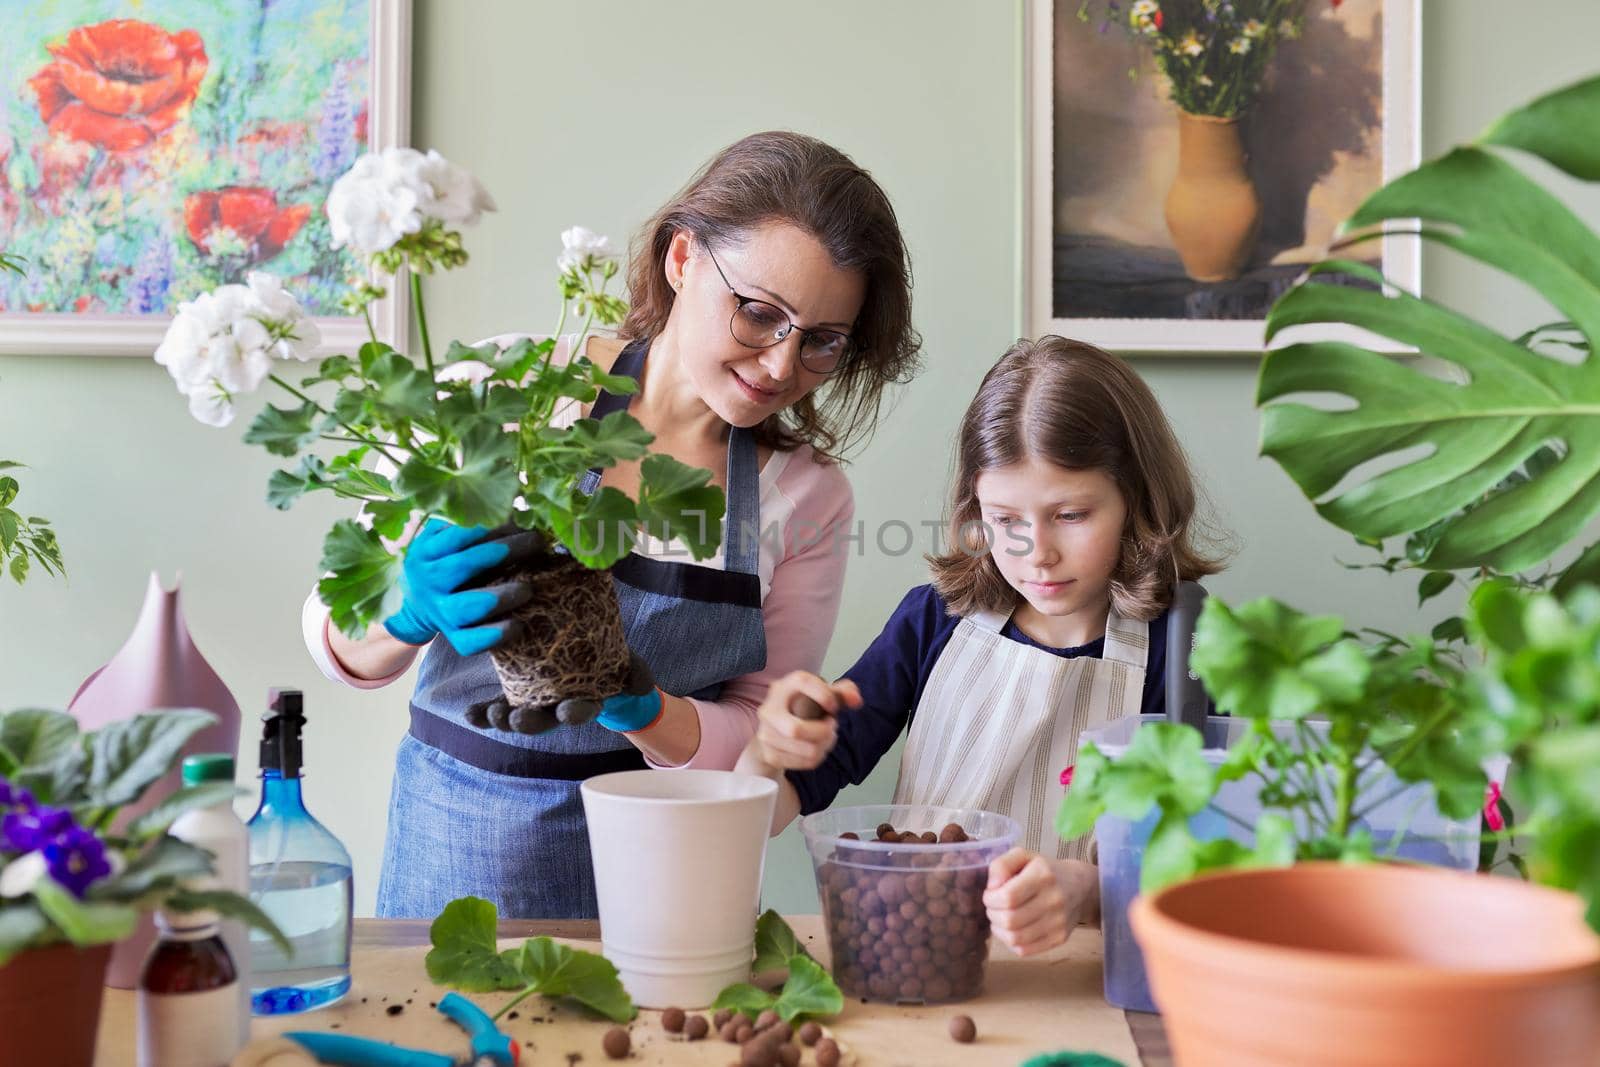 Mother and daughter child plant potted plants, flowers. Hobbies and leisure, care, family, houseplant, home potted friends concept